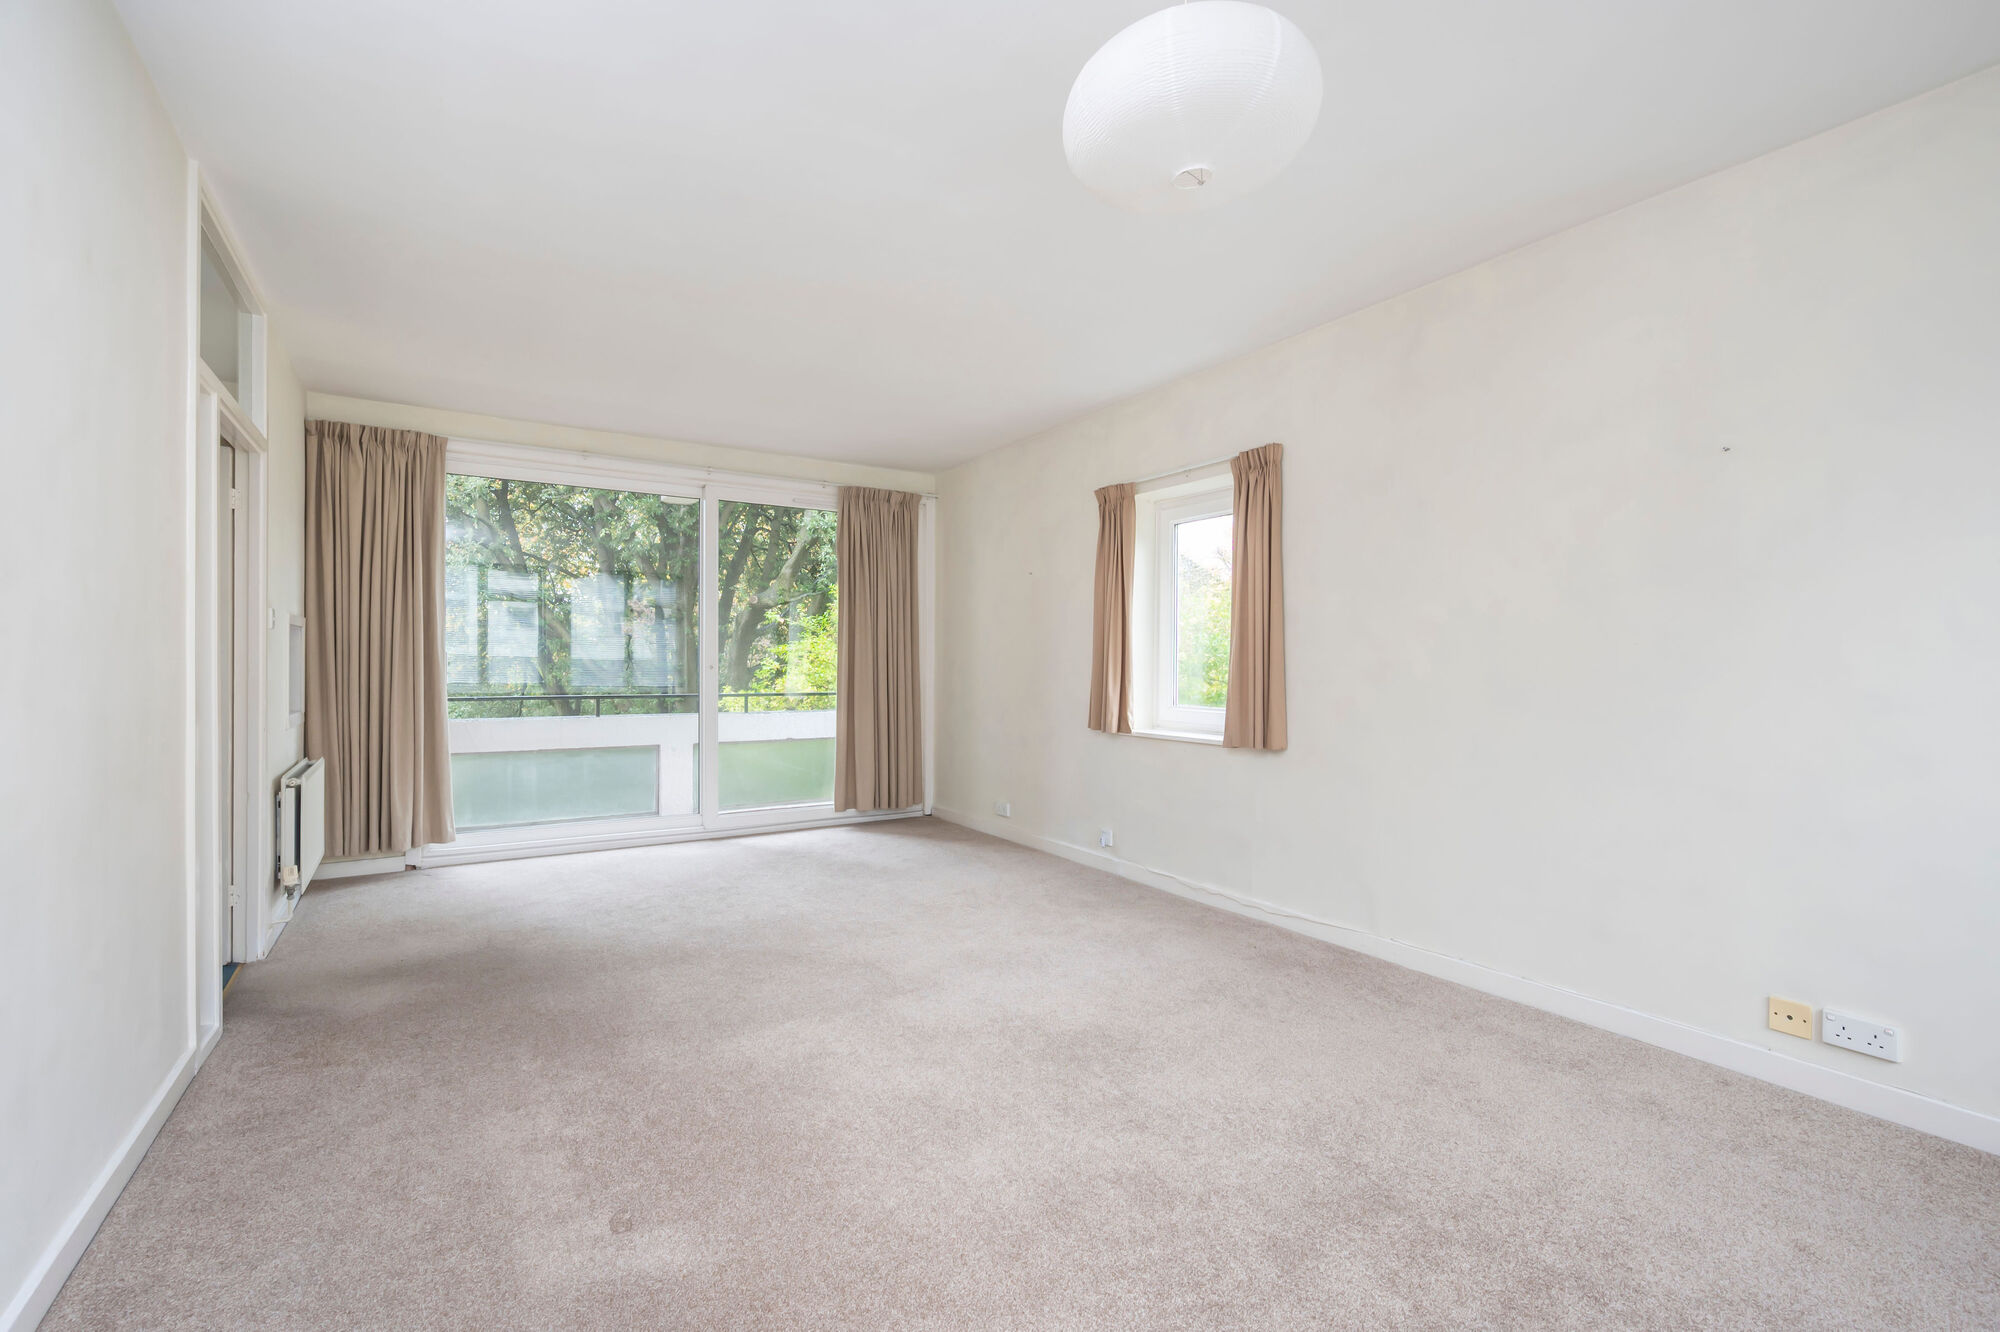 2 bedroom  flat to rent, Available from 11/03/2024 Grosvenor Hill, Wimbledon, SW19, main image